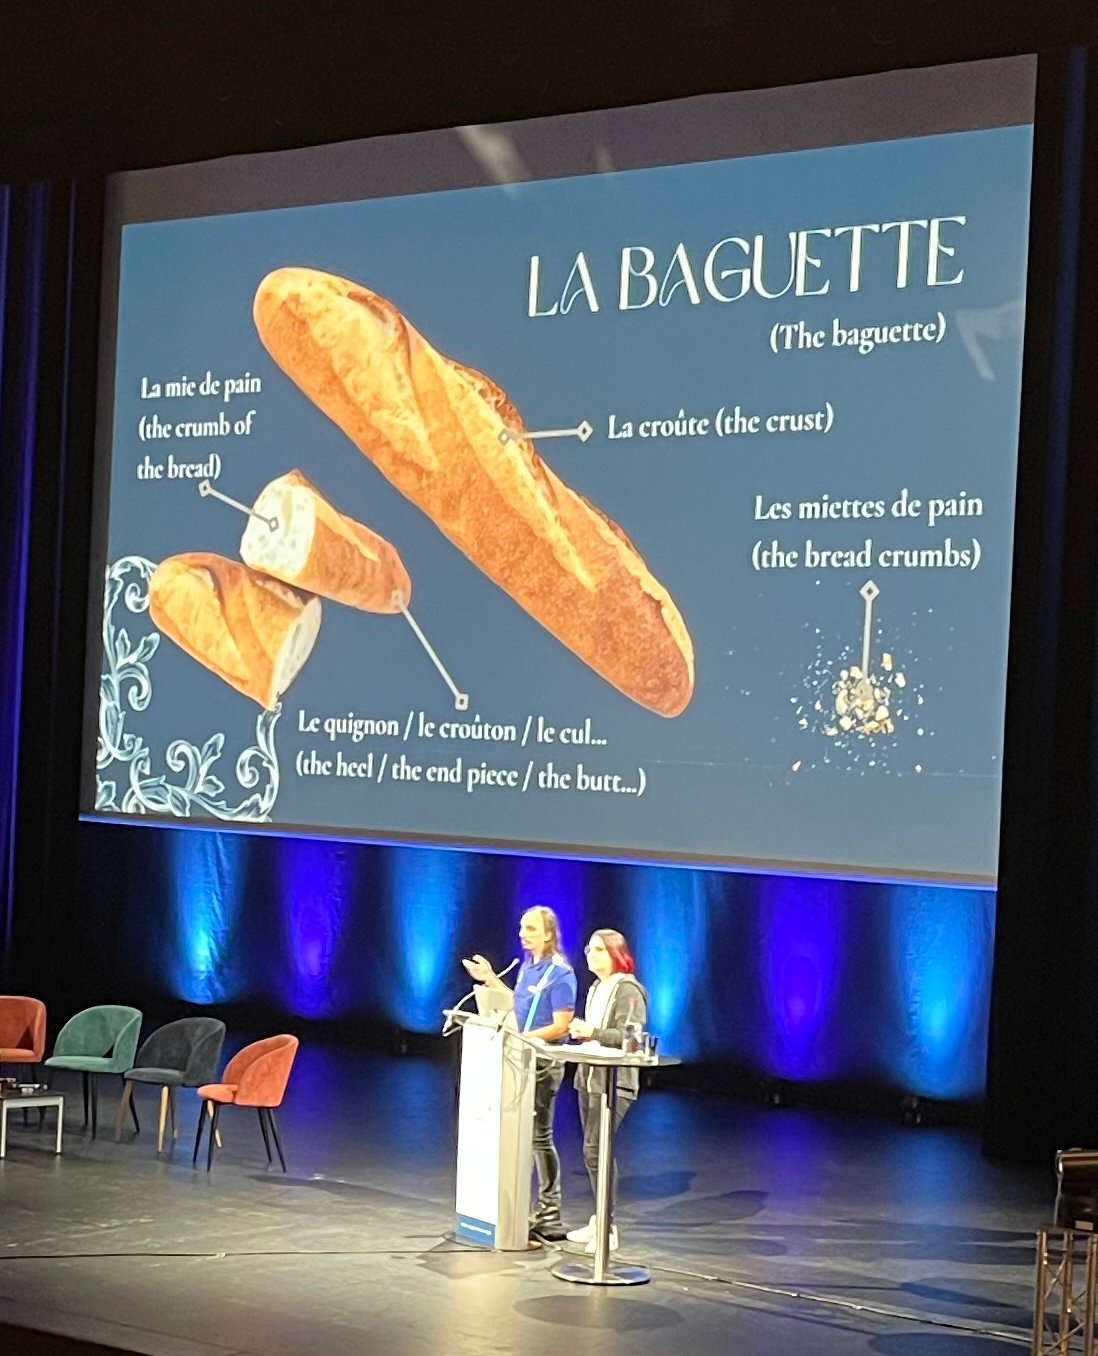 French Drupal association's presentation on the parts of a baguette